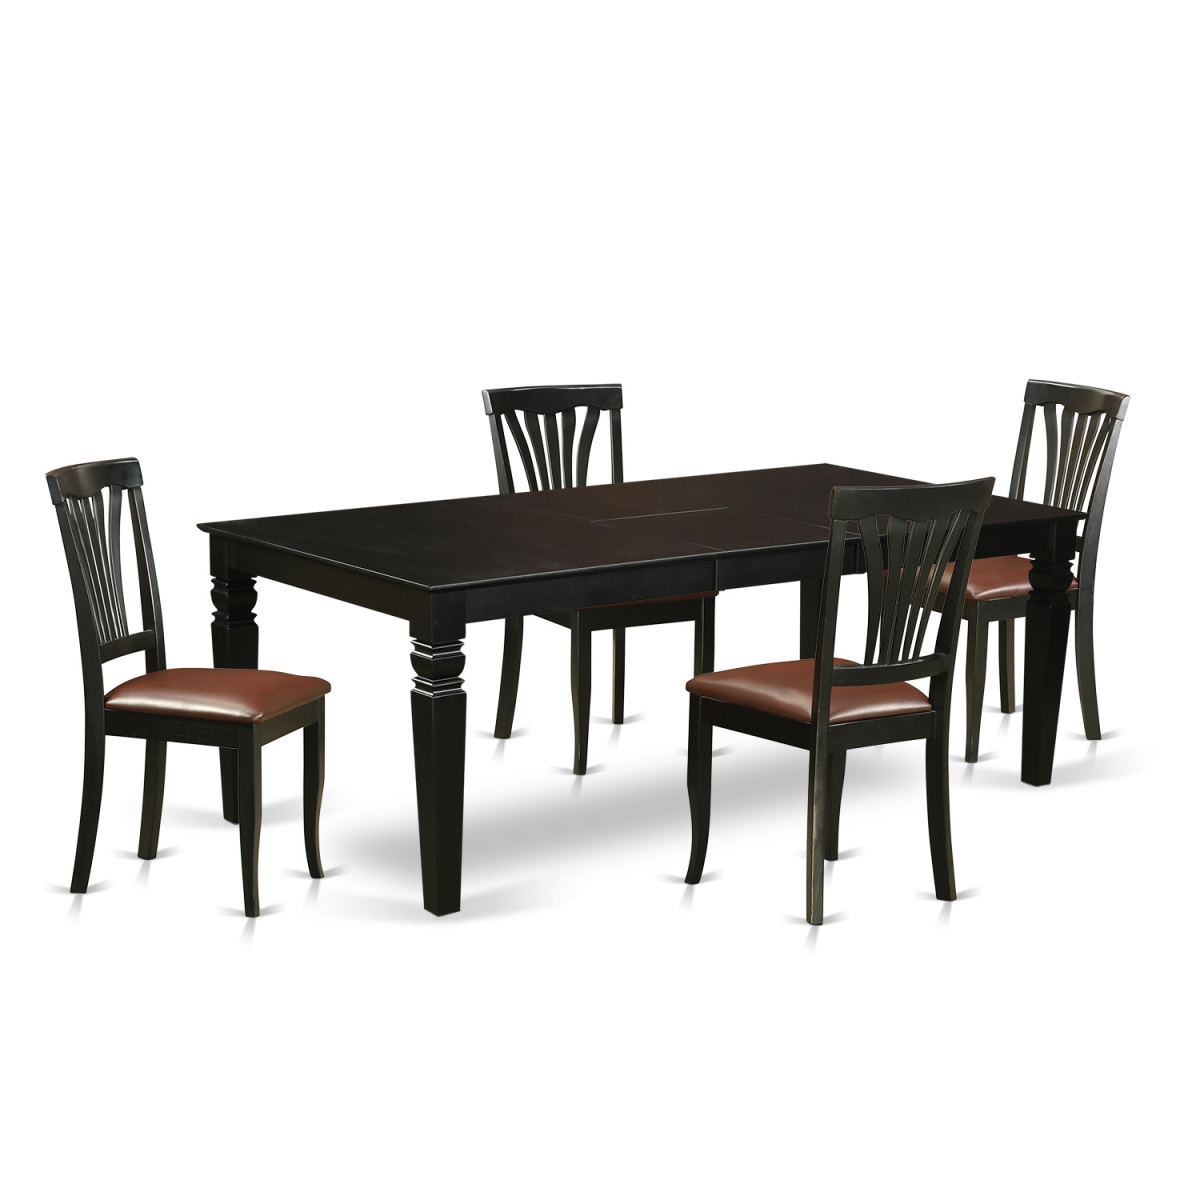 Lgav5-blk-lc Dinette Set With A Single Logan Kitchen Table & Four Faux Leather Upholstery Seat Chairs, Luxurious Black - 5 Piece